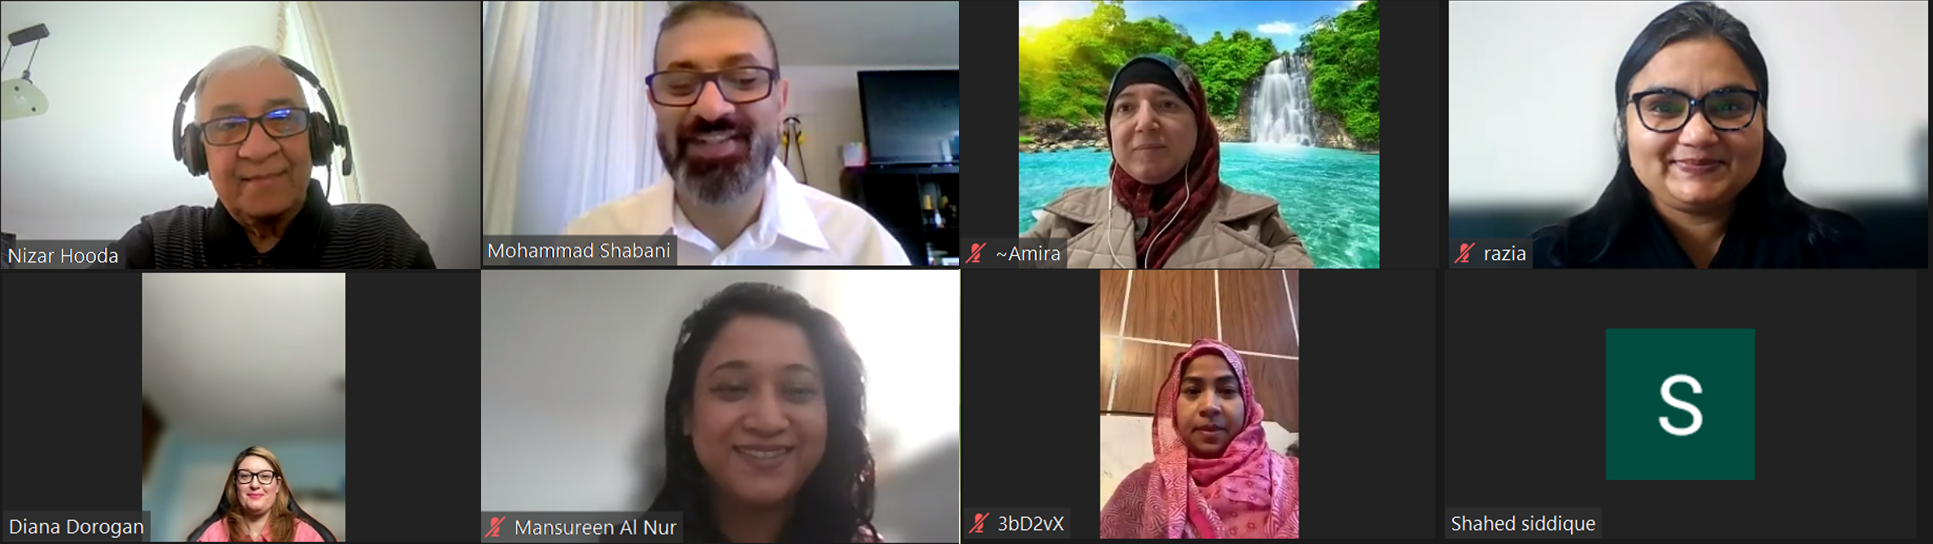 A screenshot of a Zoom meeting with people smiling